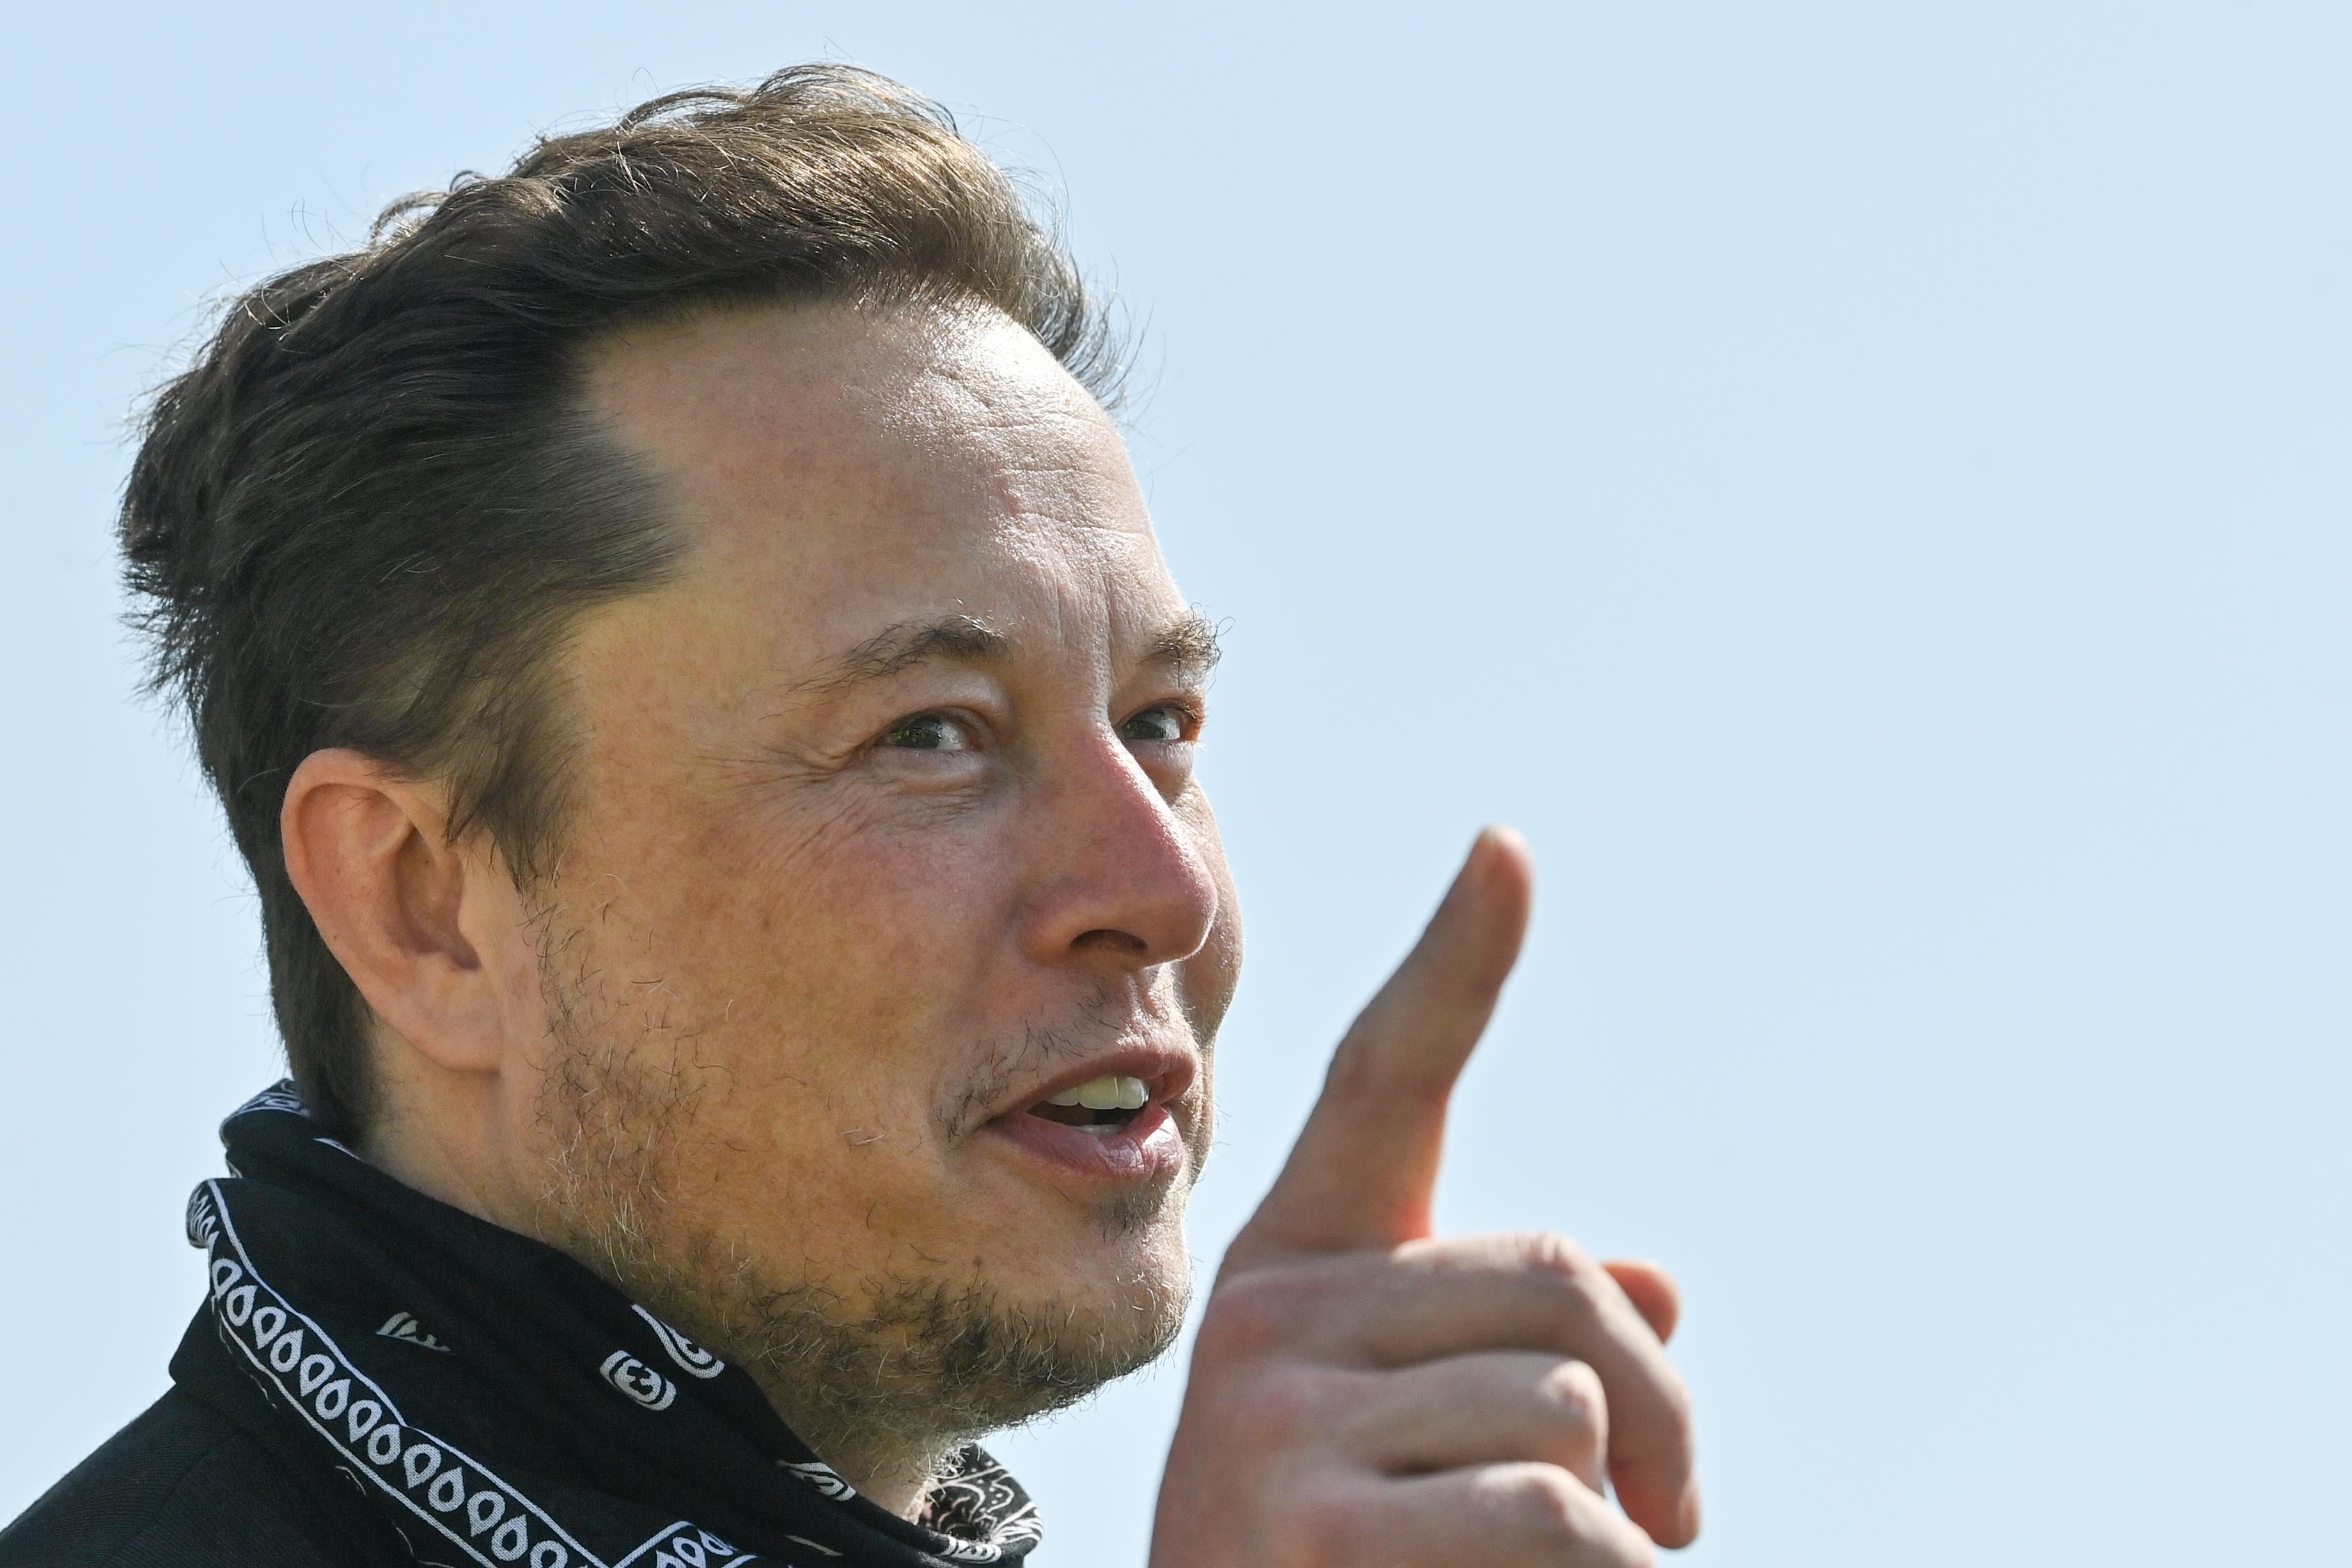 Musk pointing and smiling as he speaks outside against a blue sky